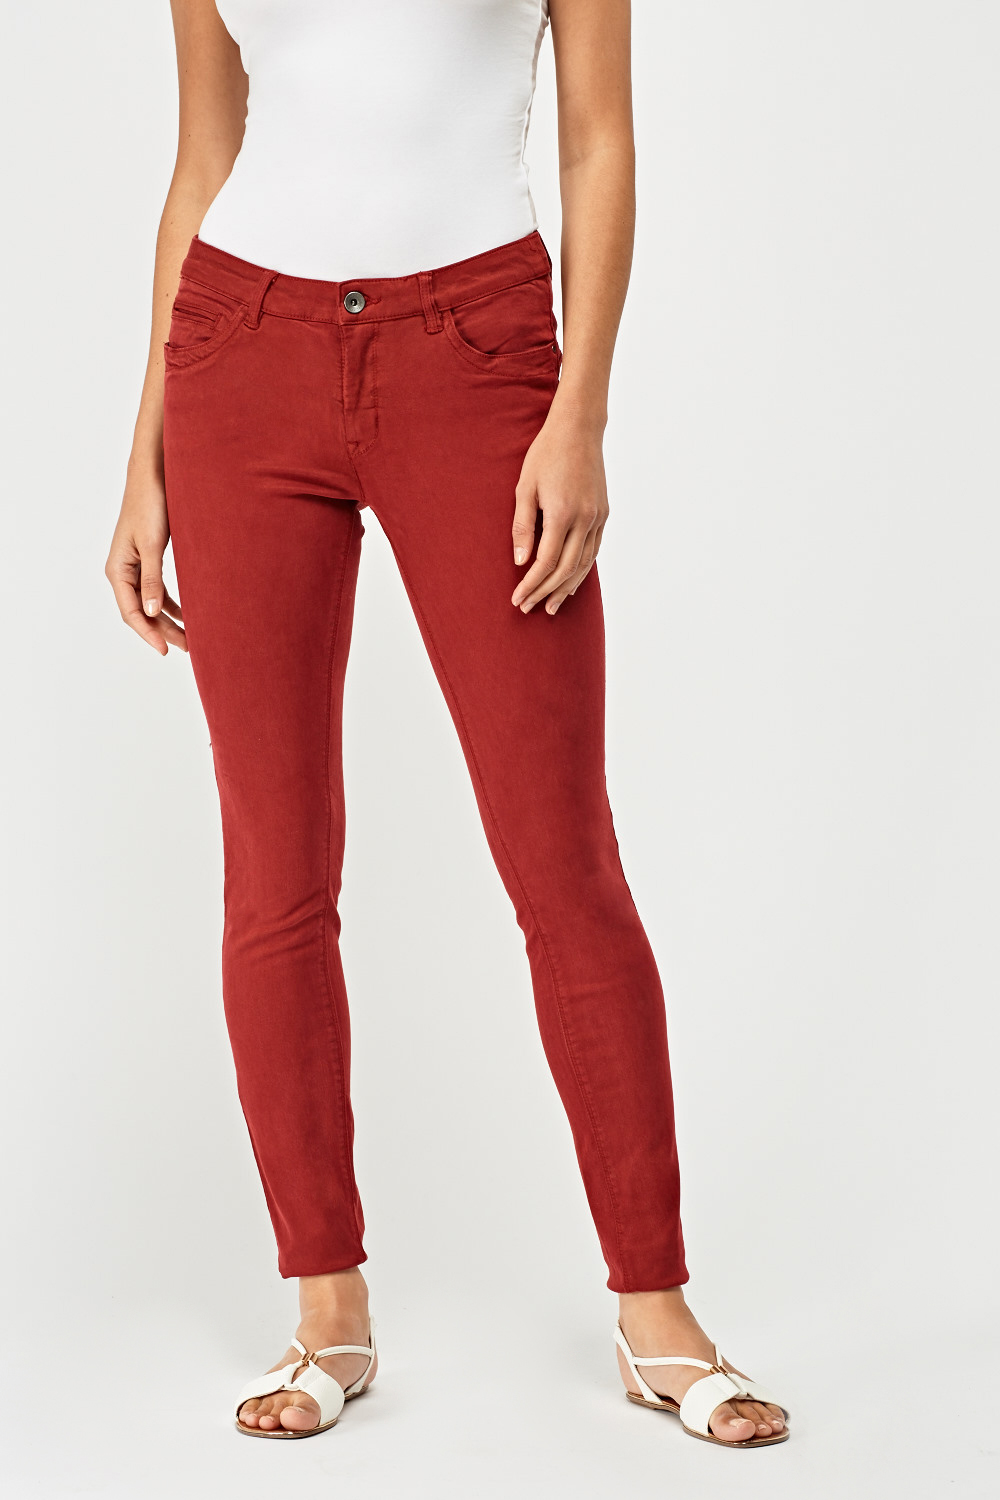 low rise push up jeans